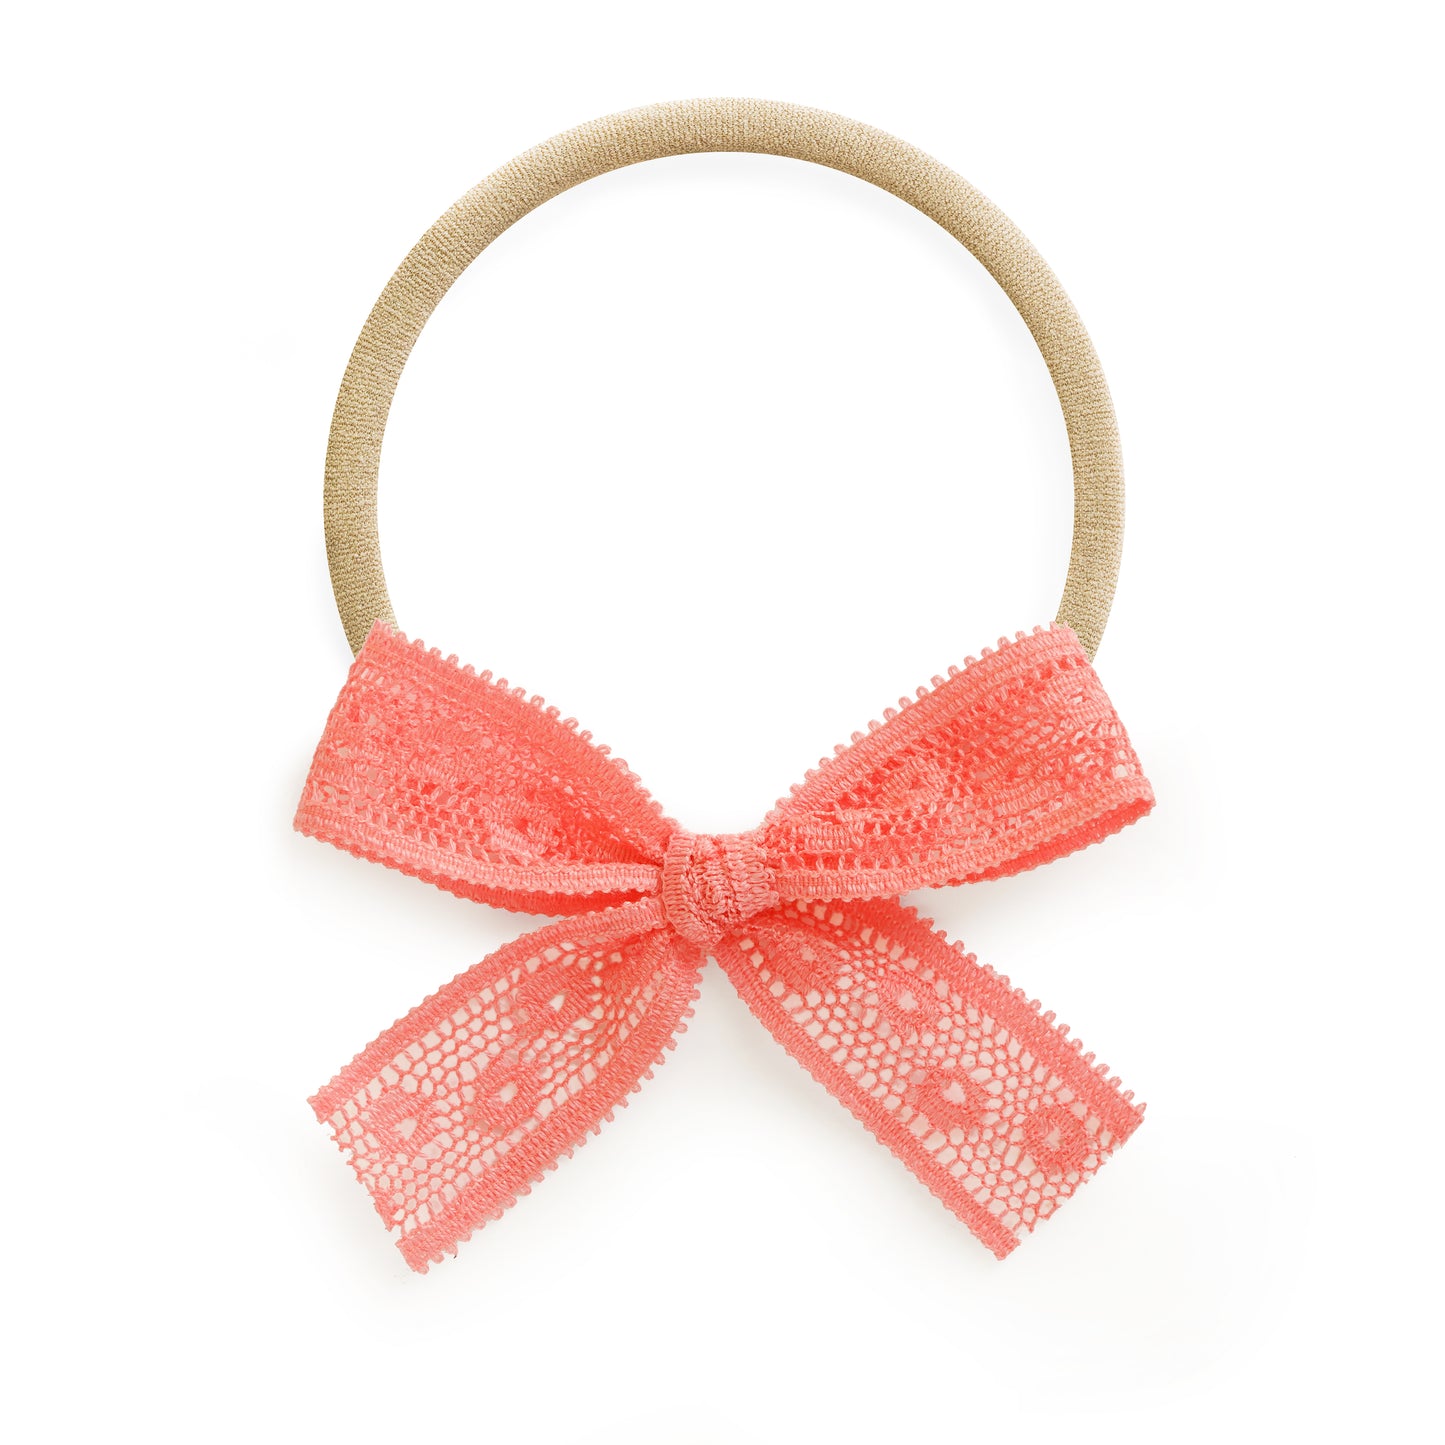 Lace Bow for Babies and Big Girls: Chloe